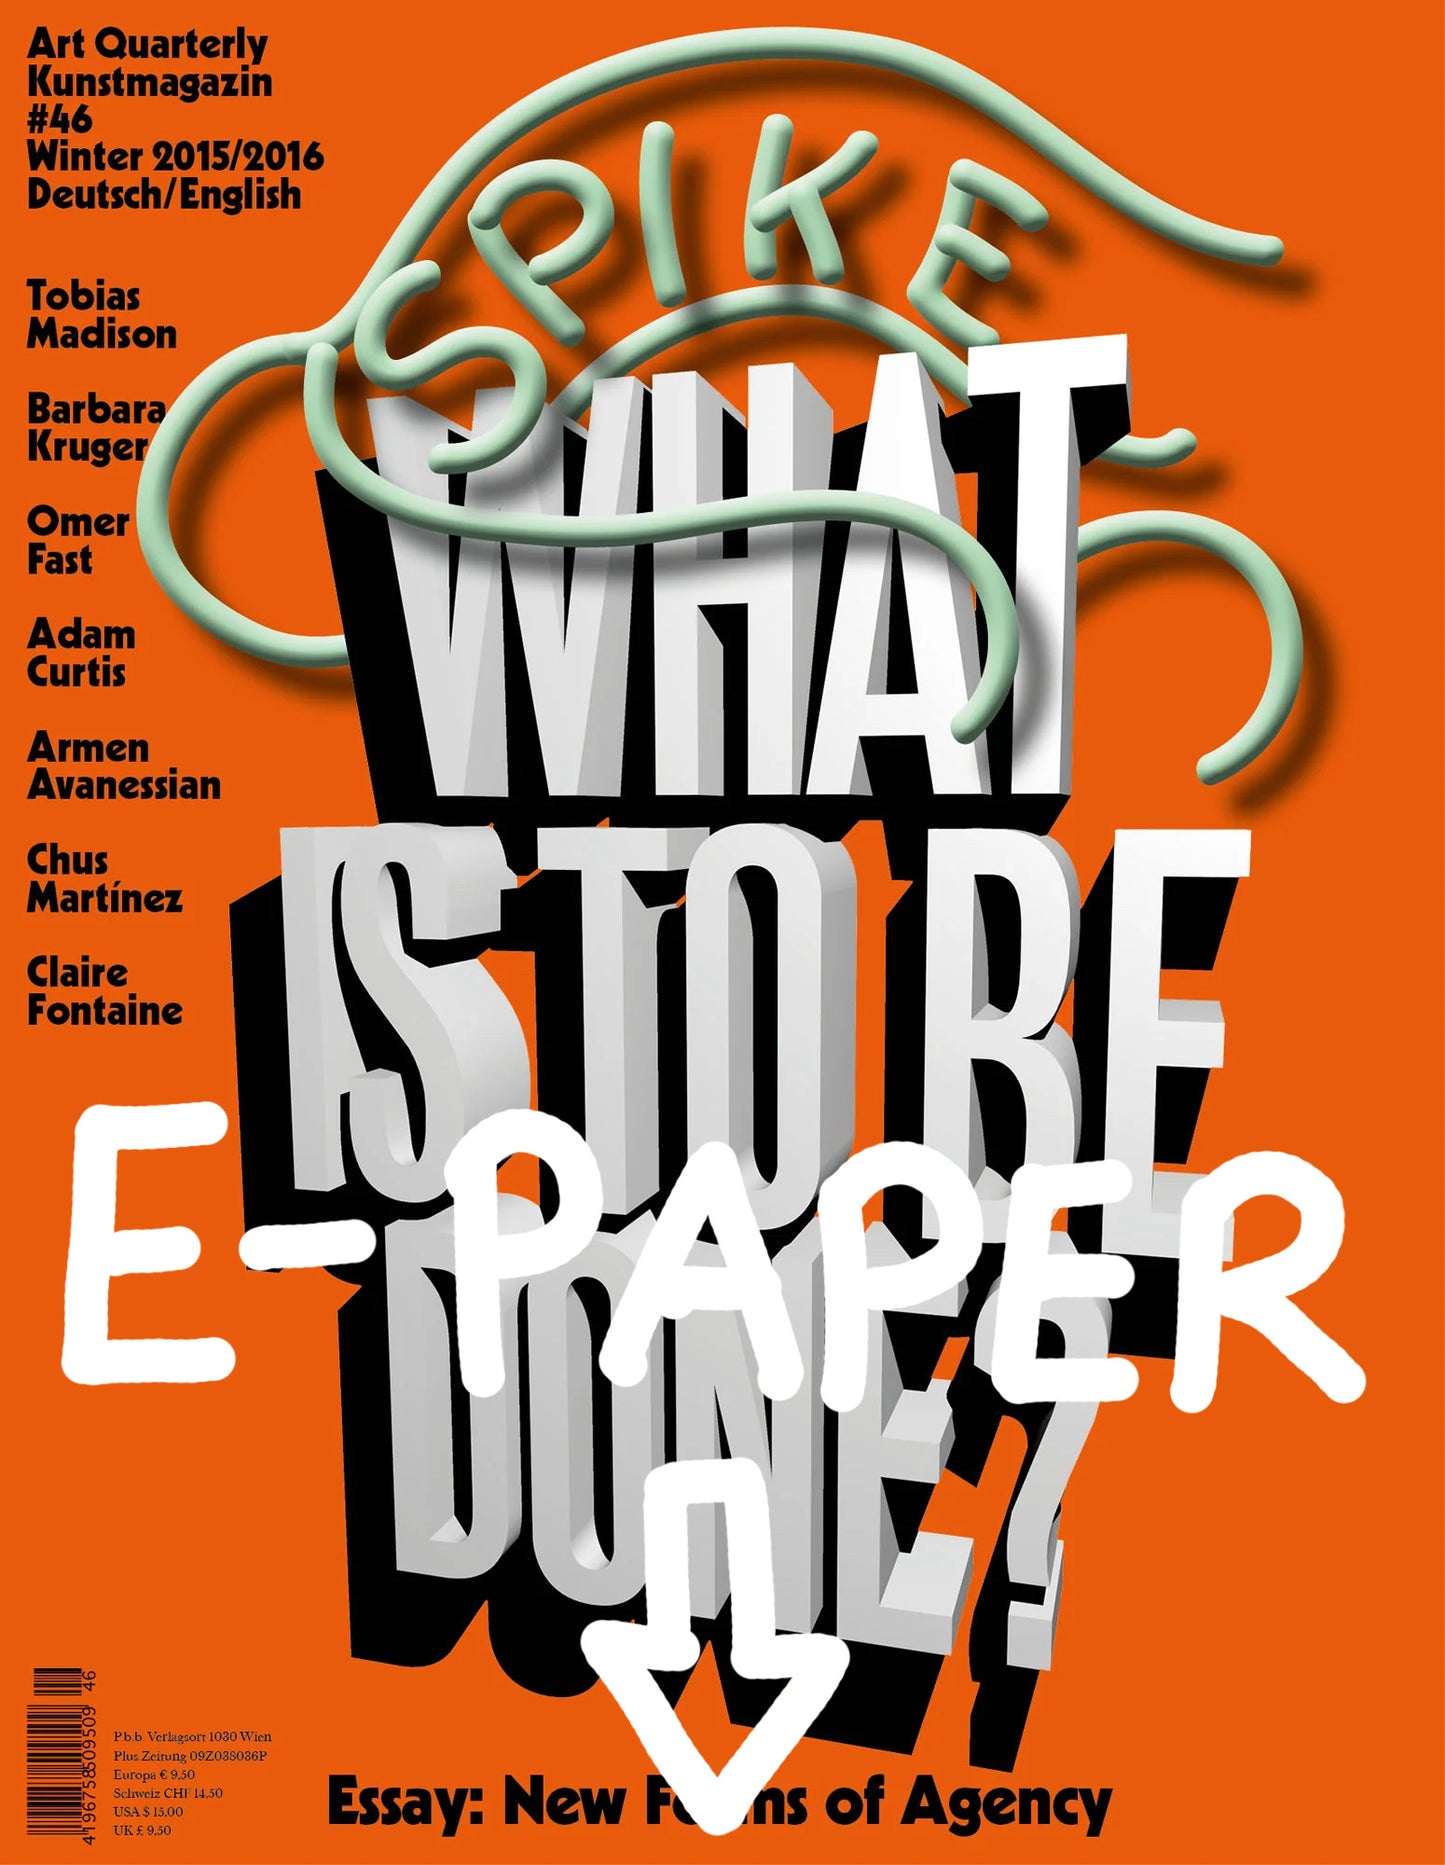 Spike ePaper (Issue 46): What is to be Done?